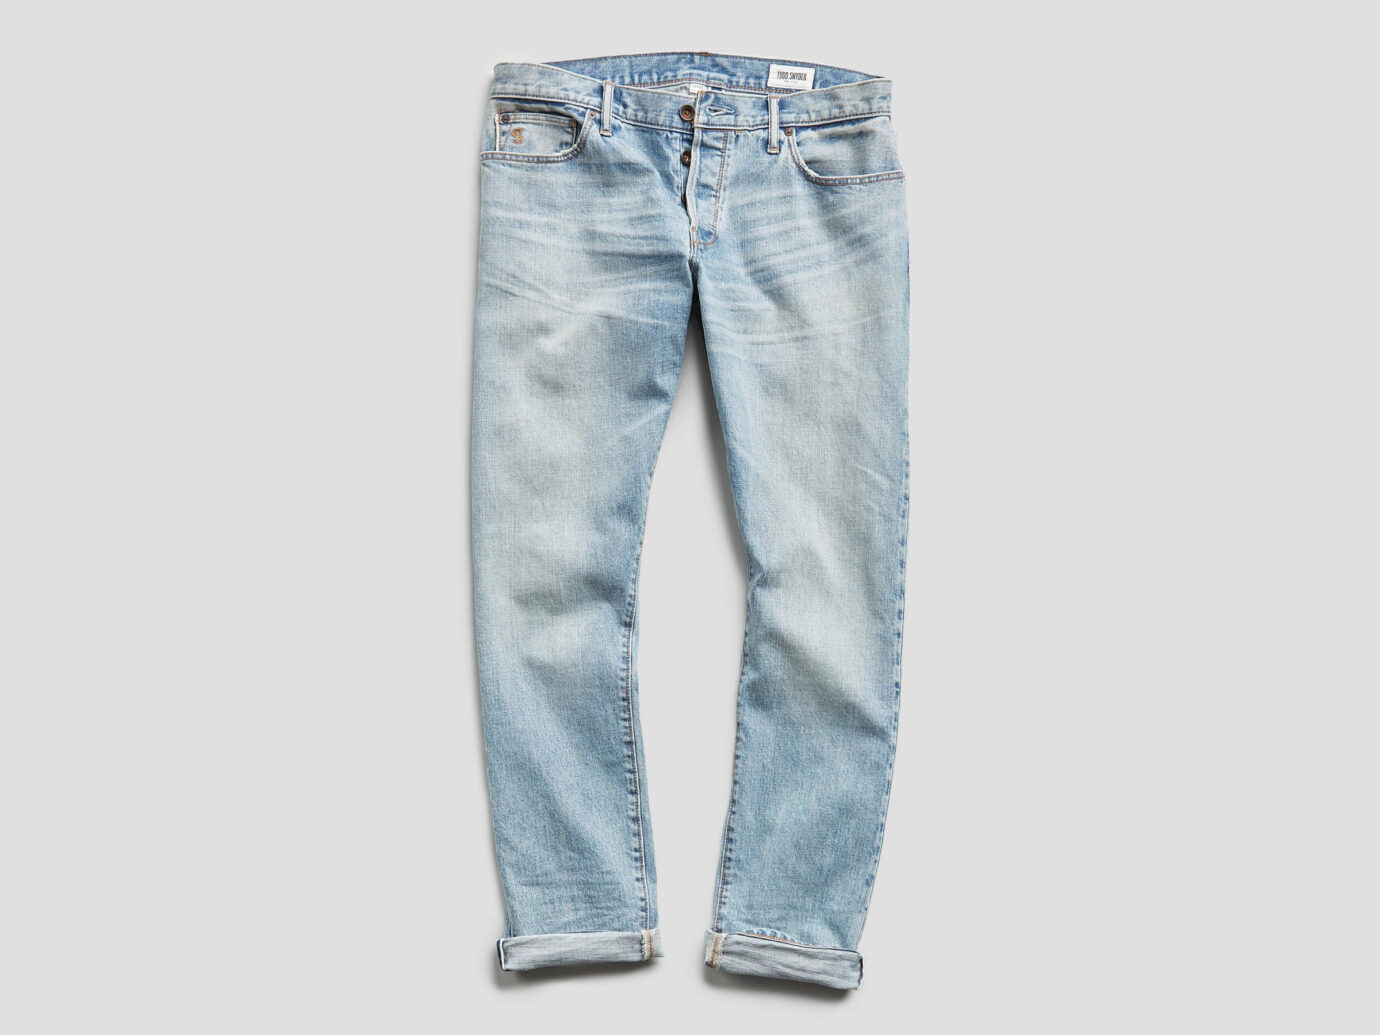 Todd Snyder Slim Fit Japanese Selvage Jeans